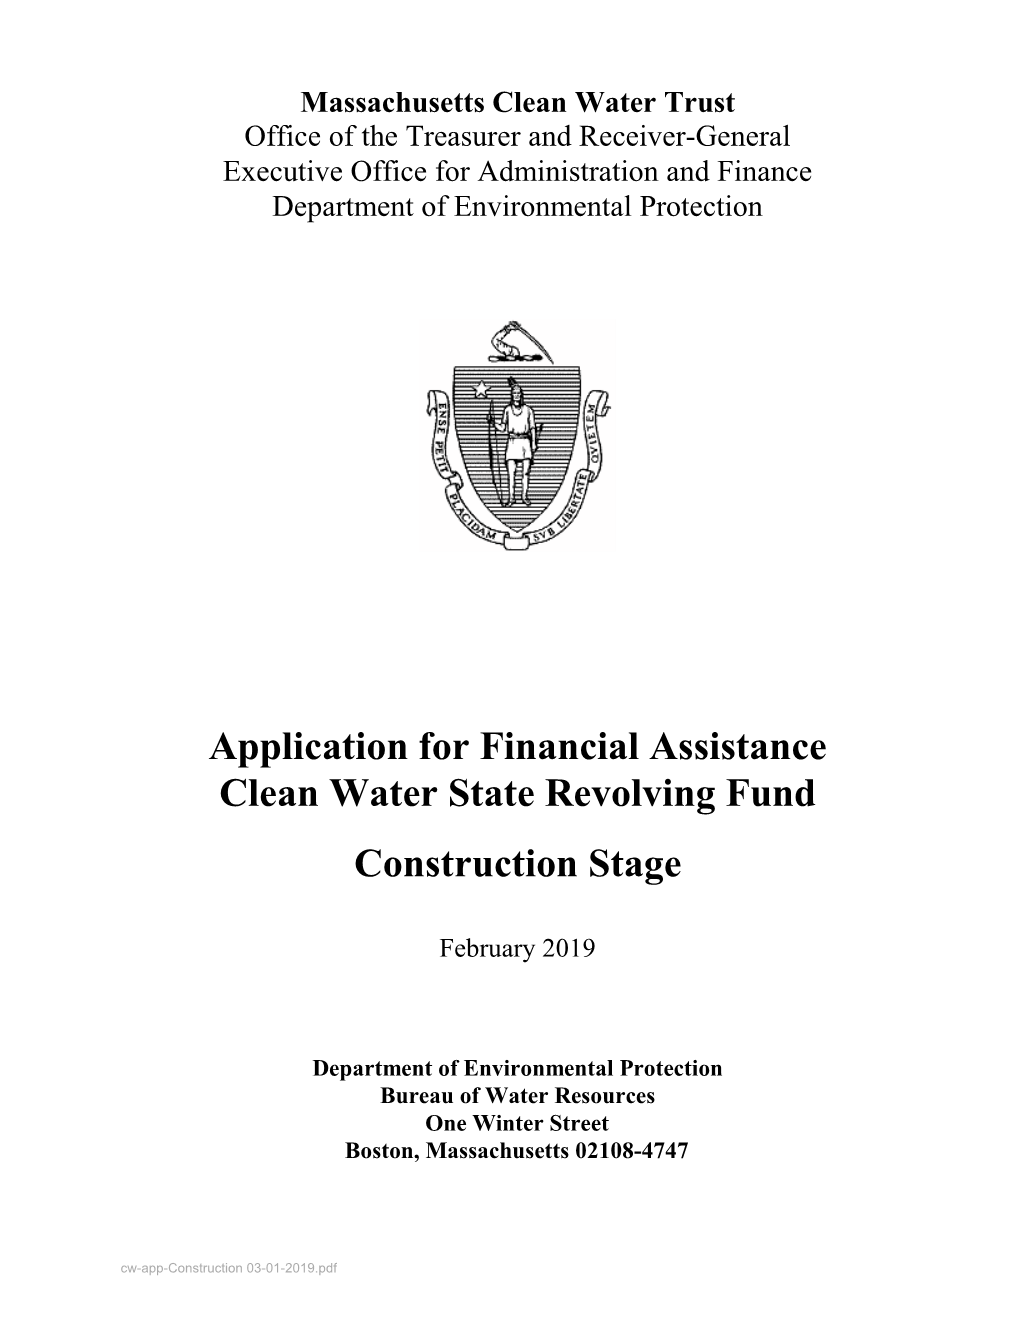 Application for Financial Assistance Clean Water State Revolving Fund Construction Stage